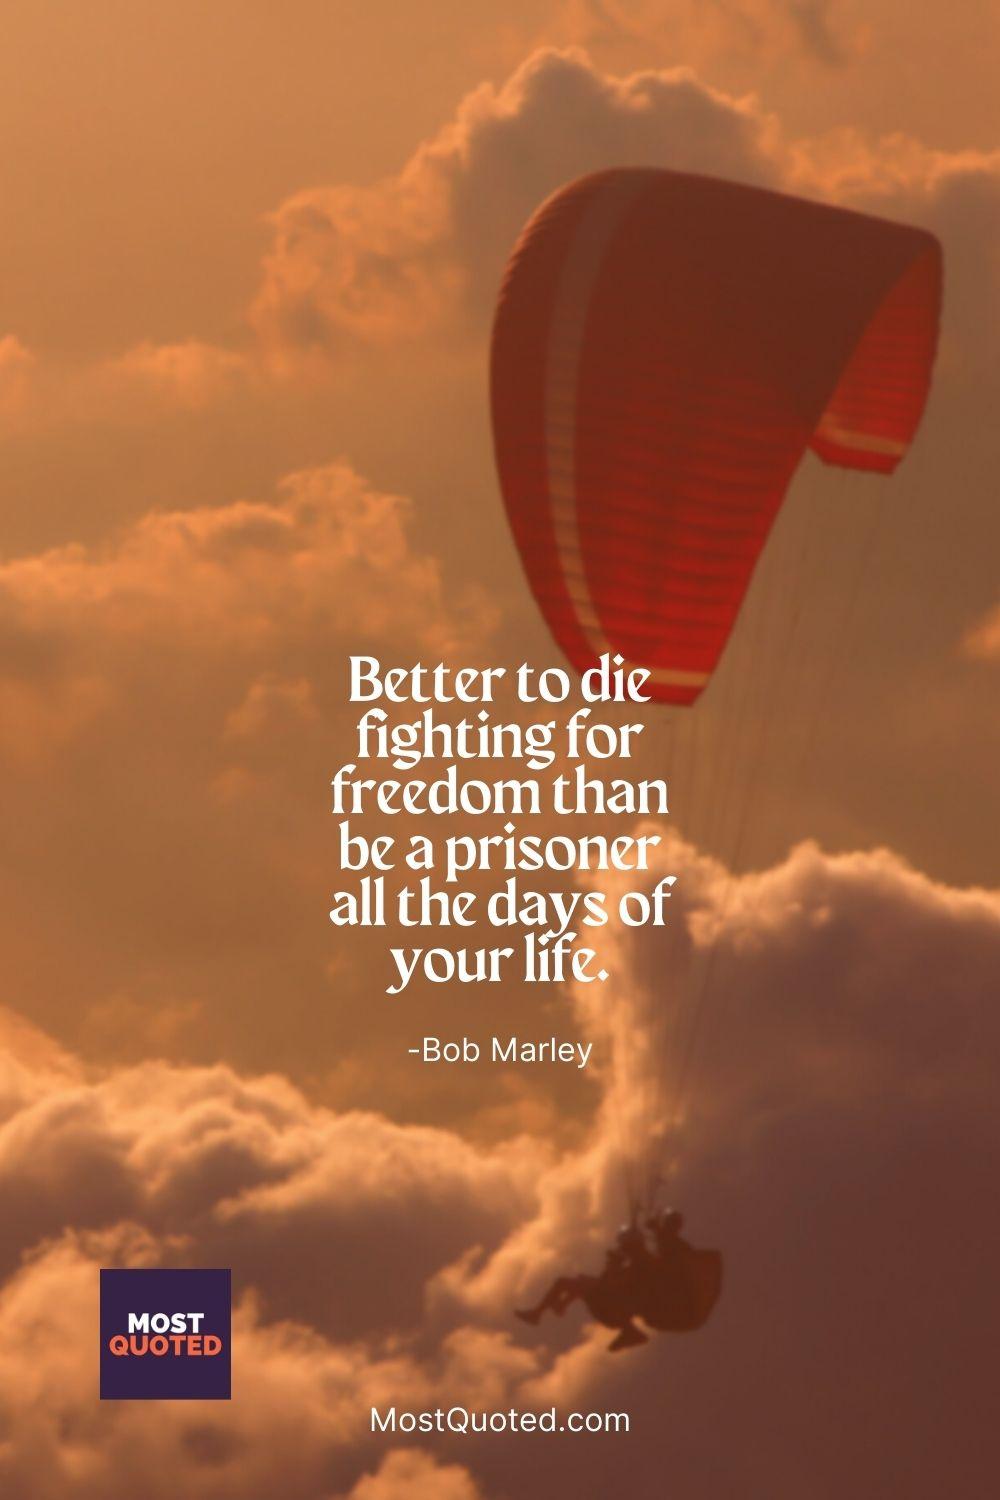 Better to die fighting for freedom than be a prisoner all the days of your life. - Bob Marley